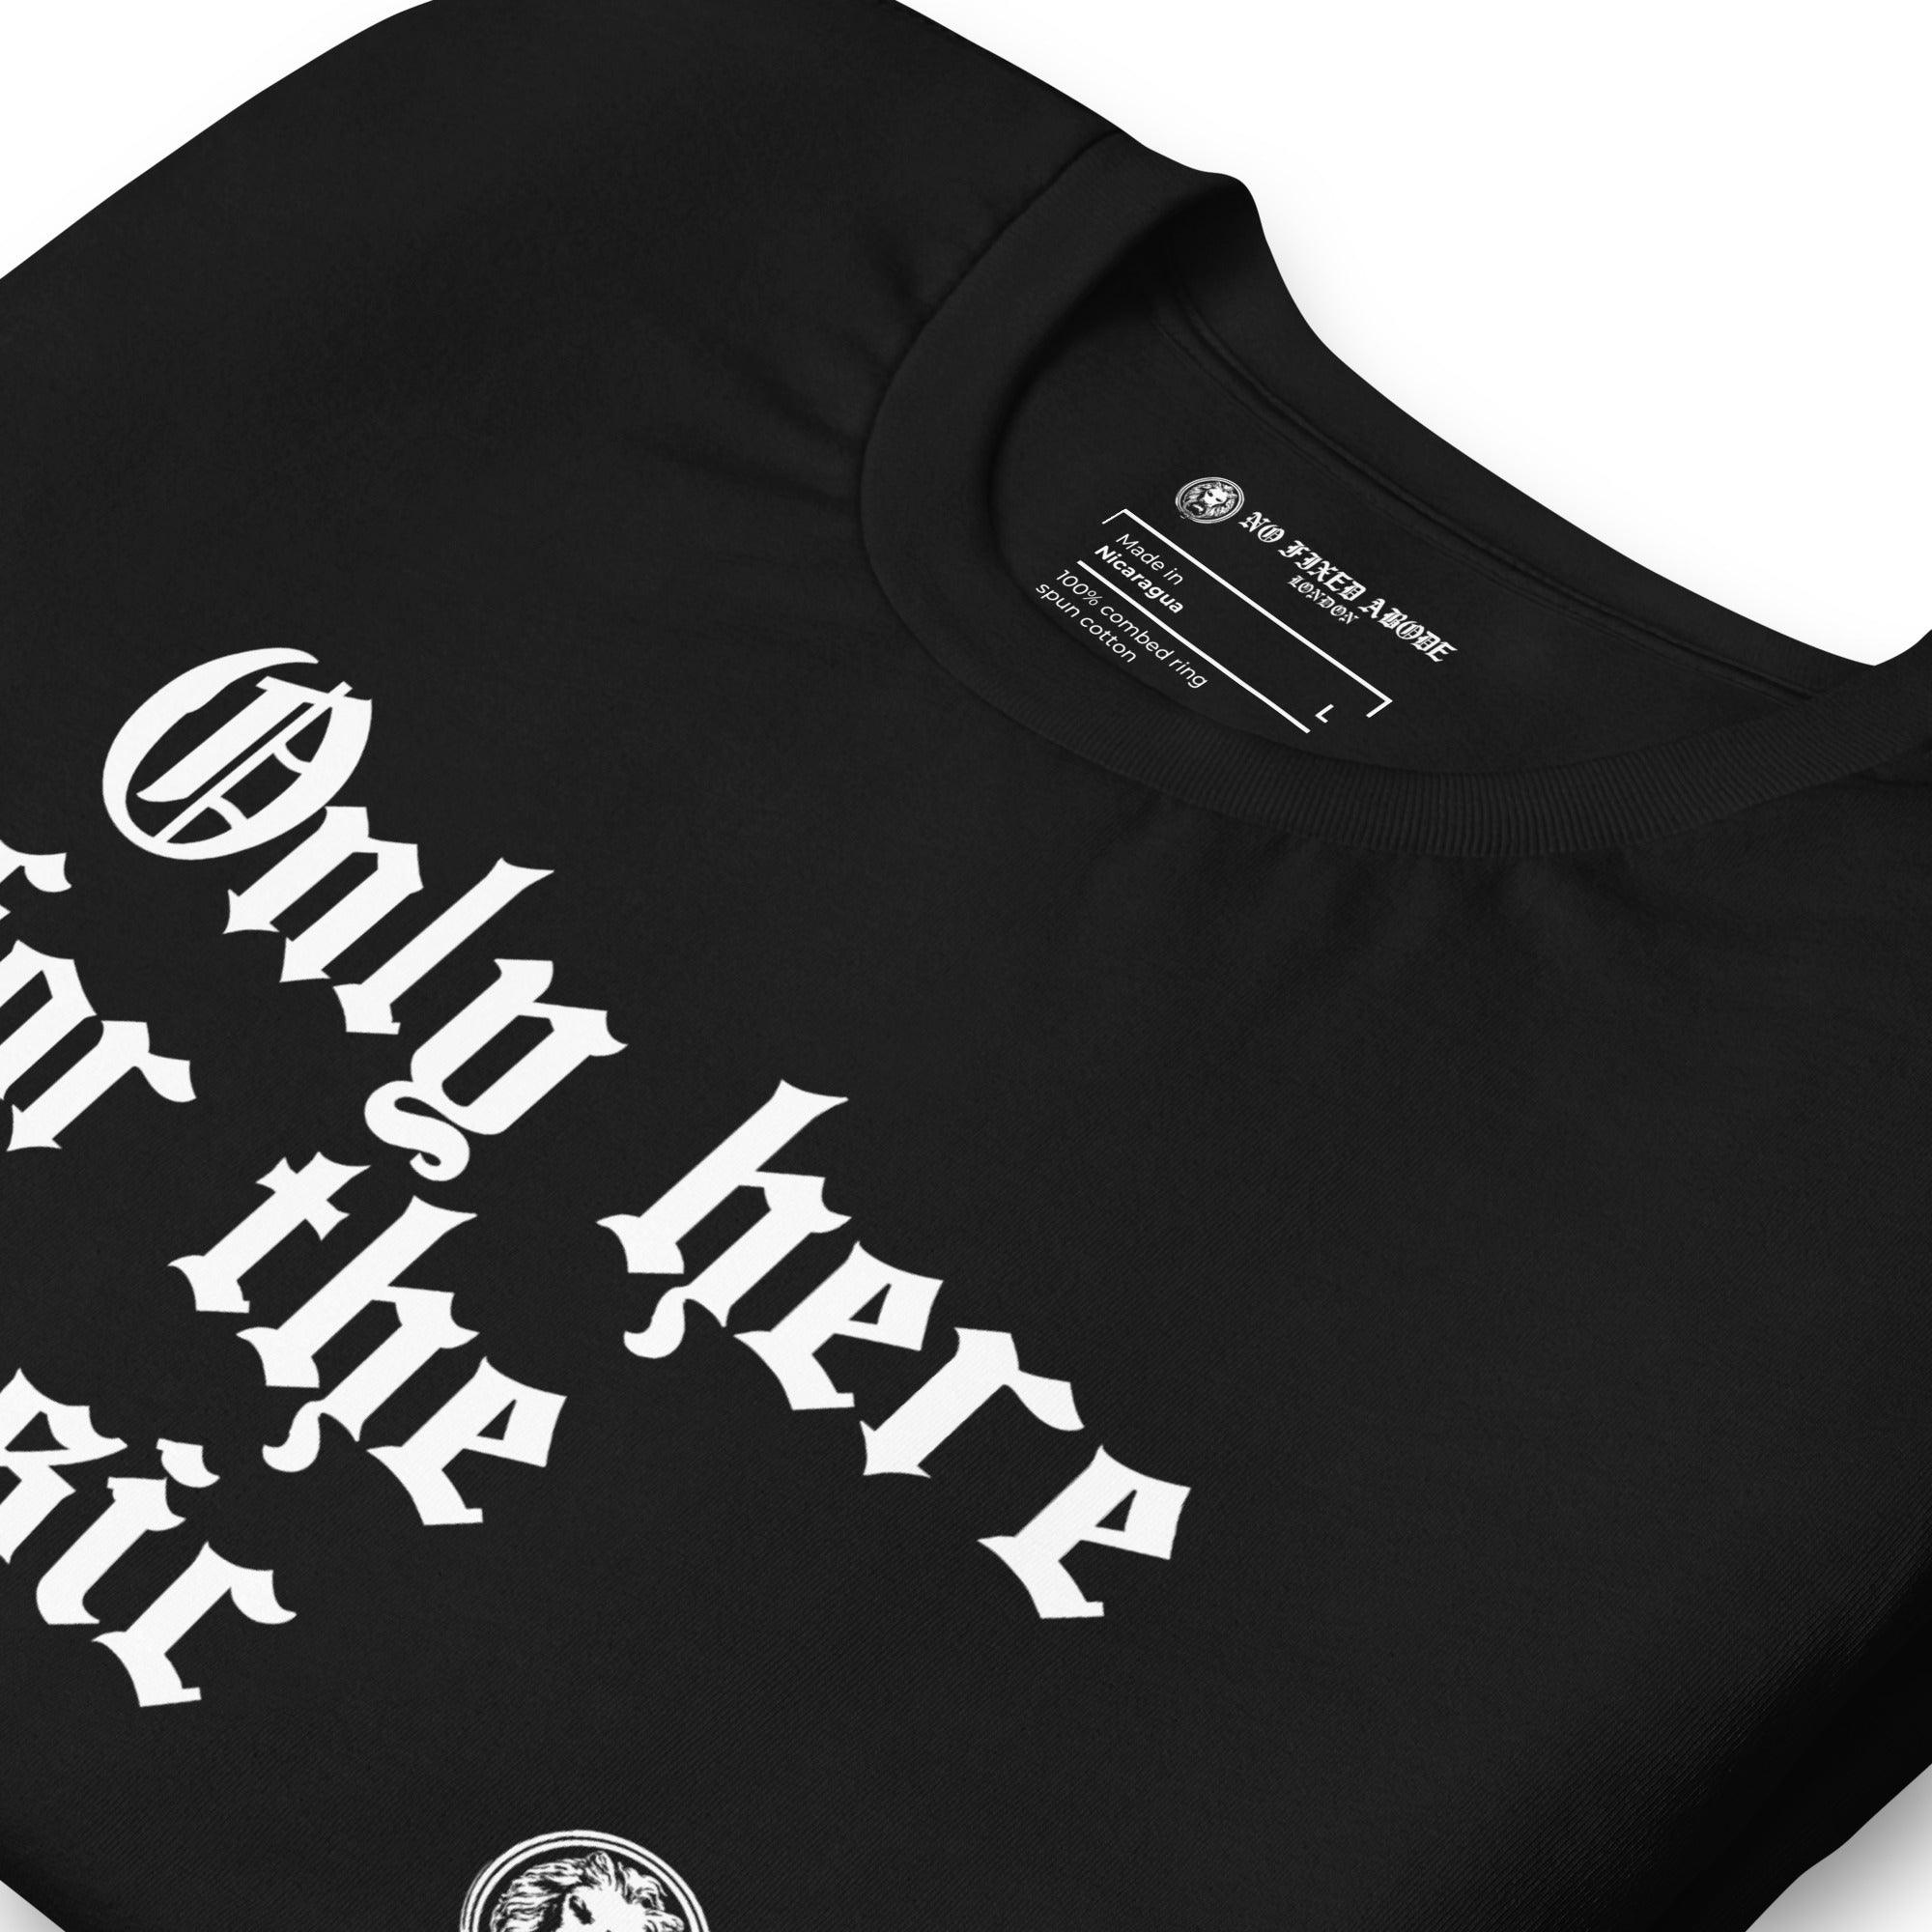 Only here for the Music t-shirt - NO FIXED ABODE Punkrock Mens Luxury Streetwear UK